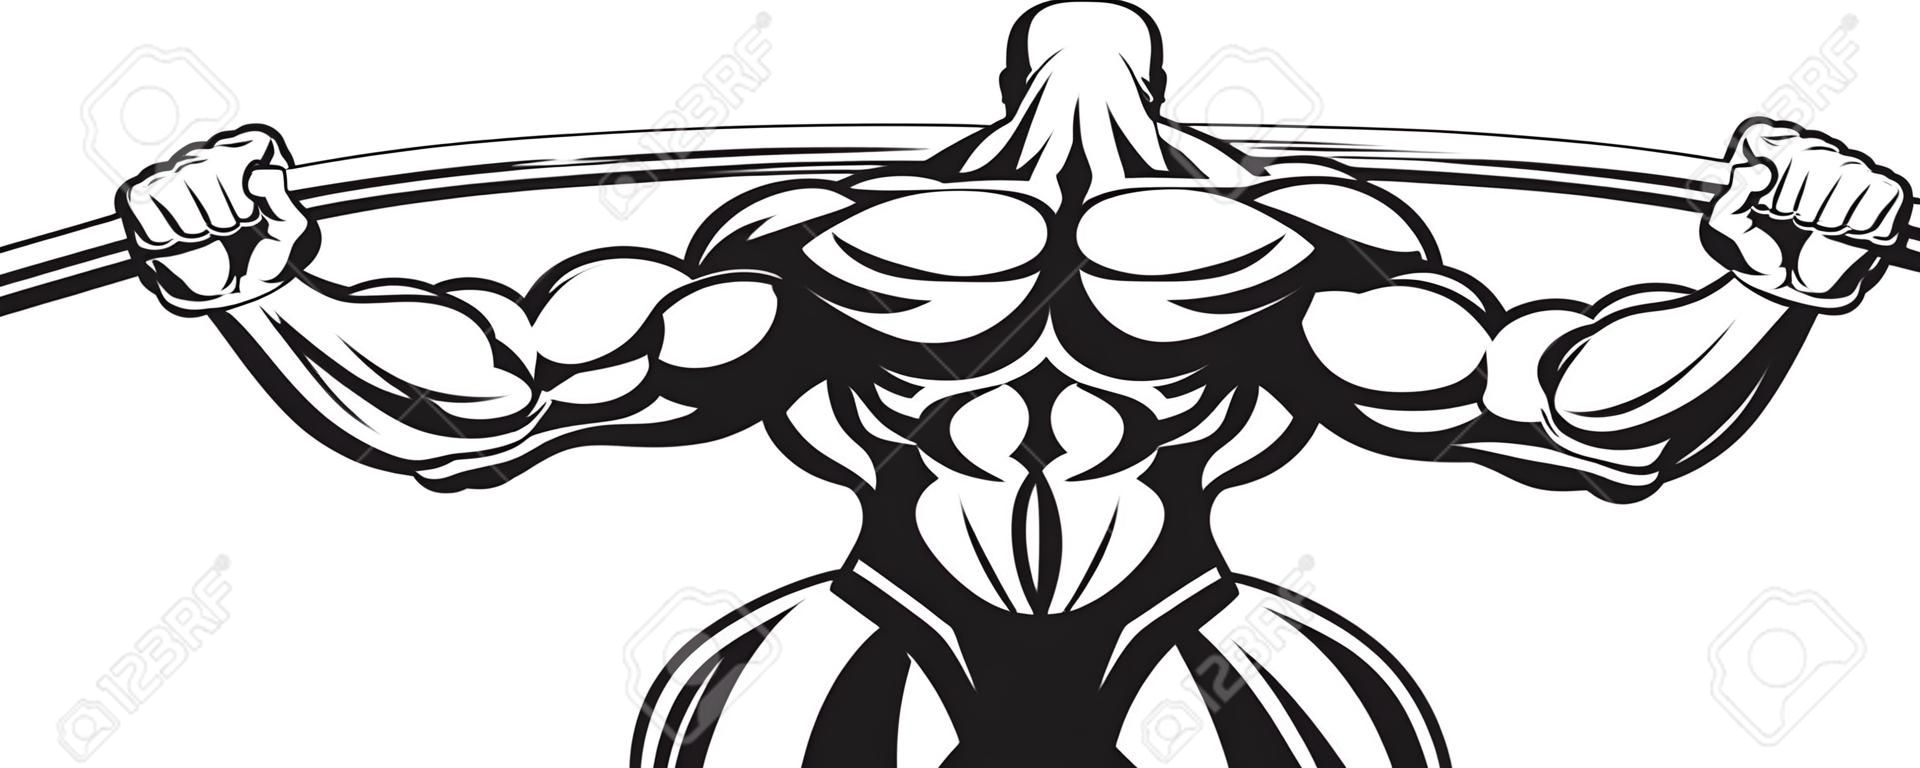 Illustration of a bodybuilder performs an exercise with a barbell.